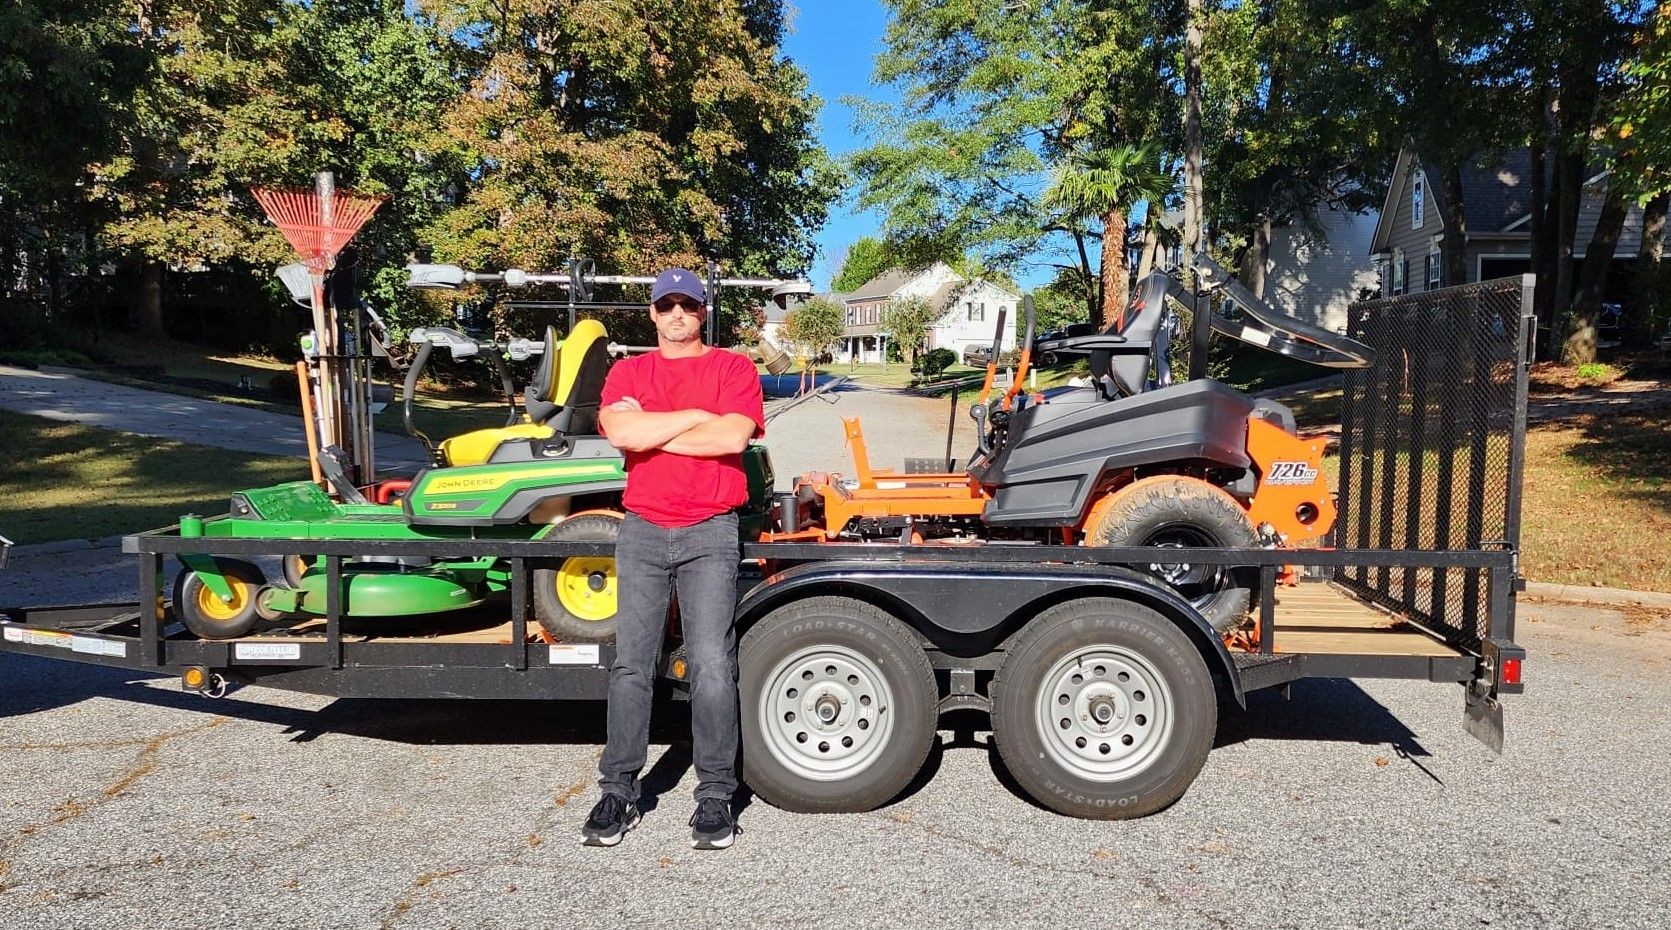 Man standing in front of trailer with lawn mowers and yard cleaning tools